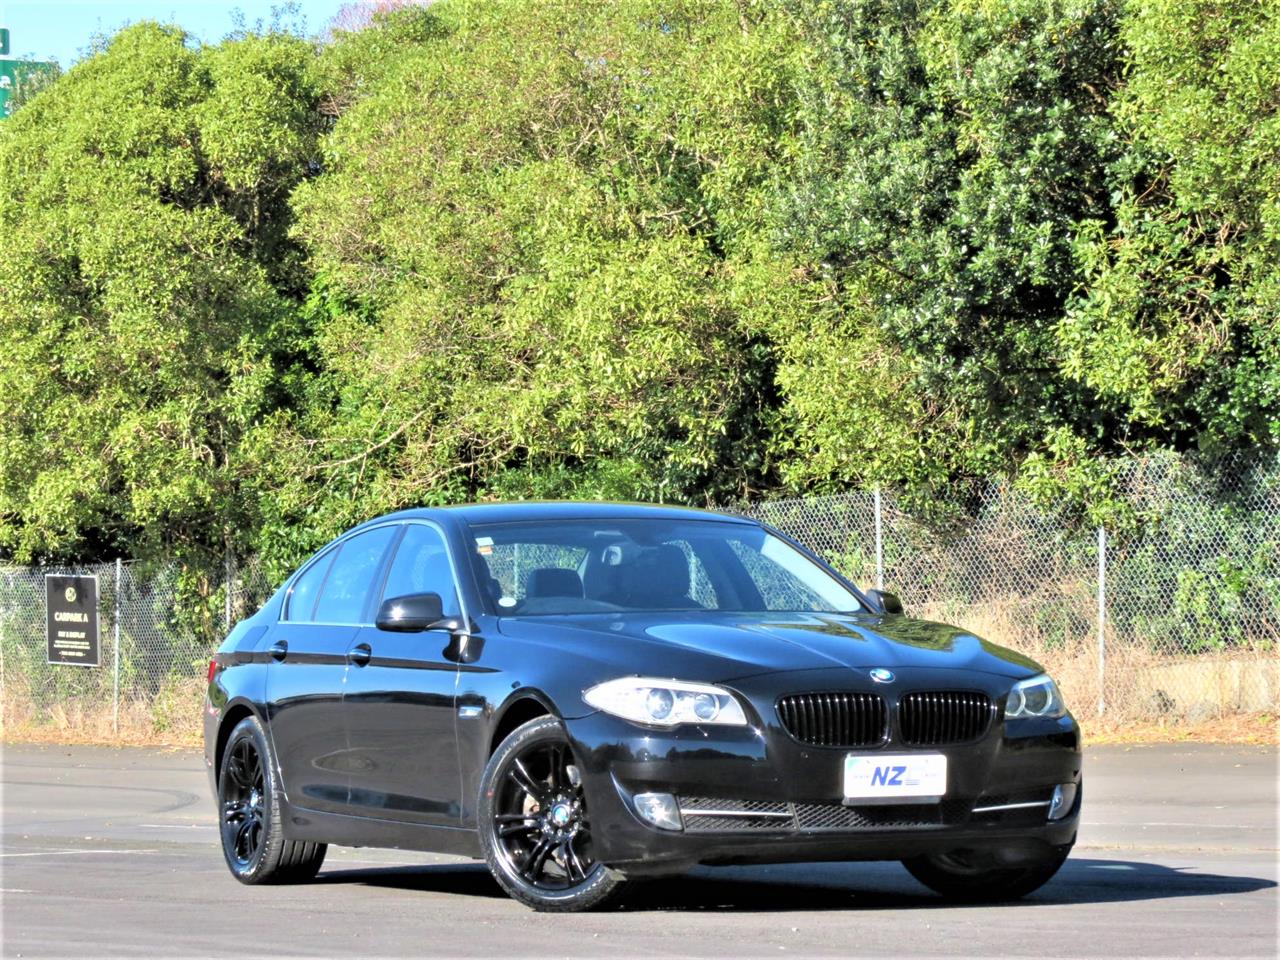 NZC best hot price for 2013 BMW 520D in Auckland